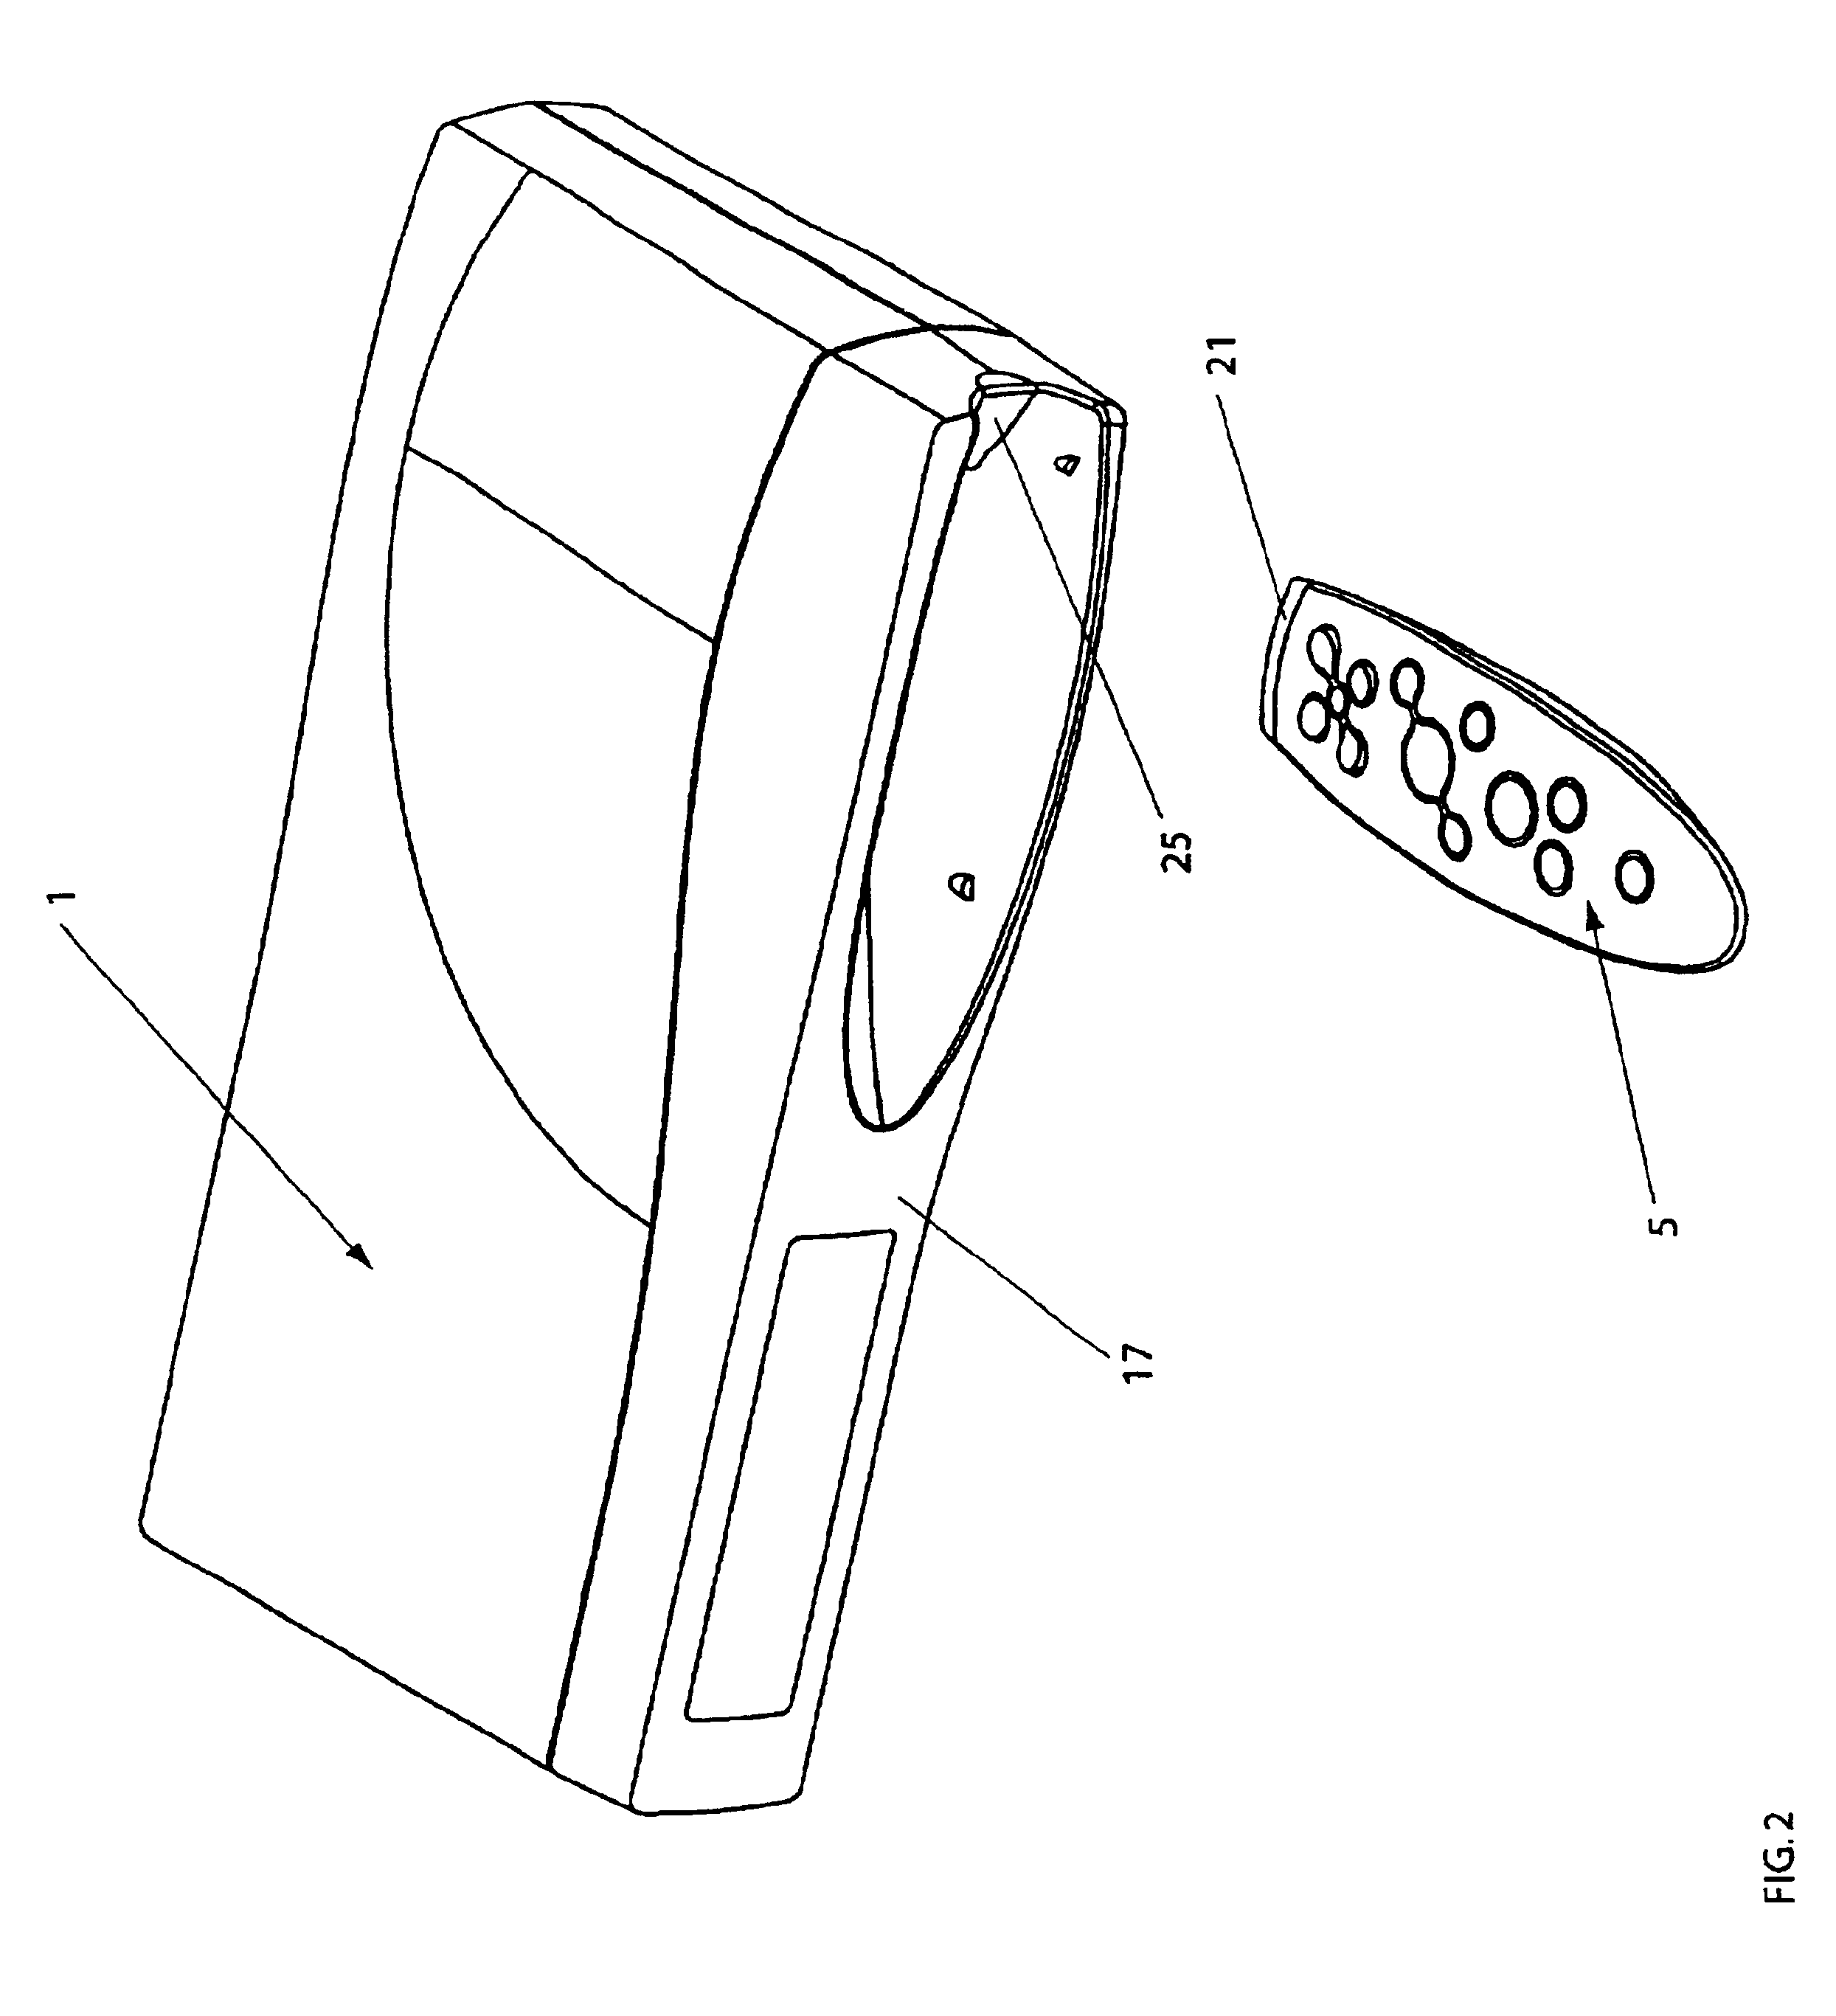 Detachable remote controller for an electronic entertainment device and a method for using the same